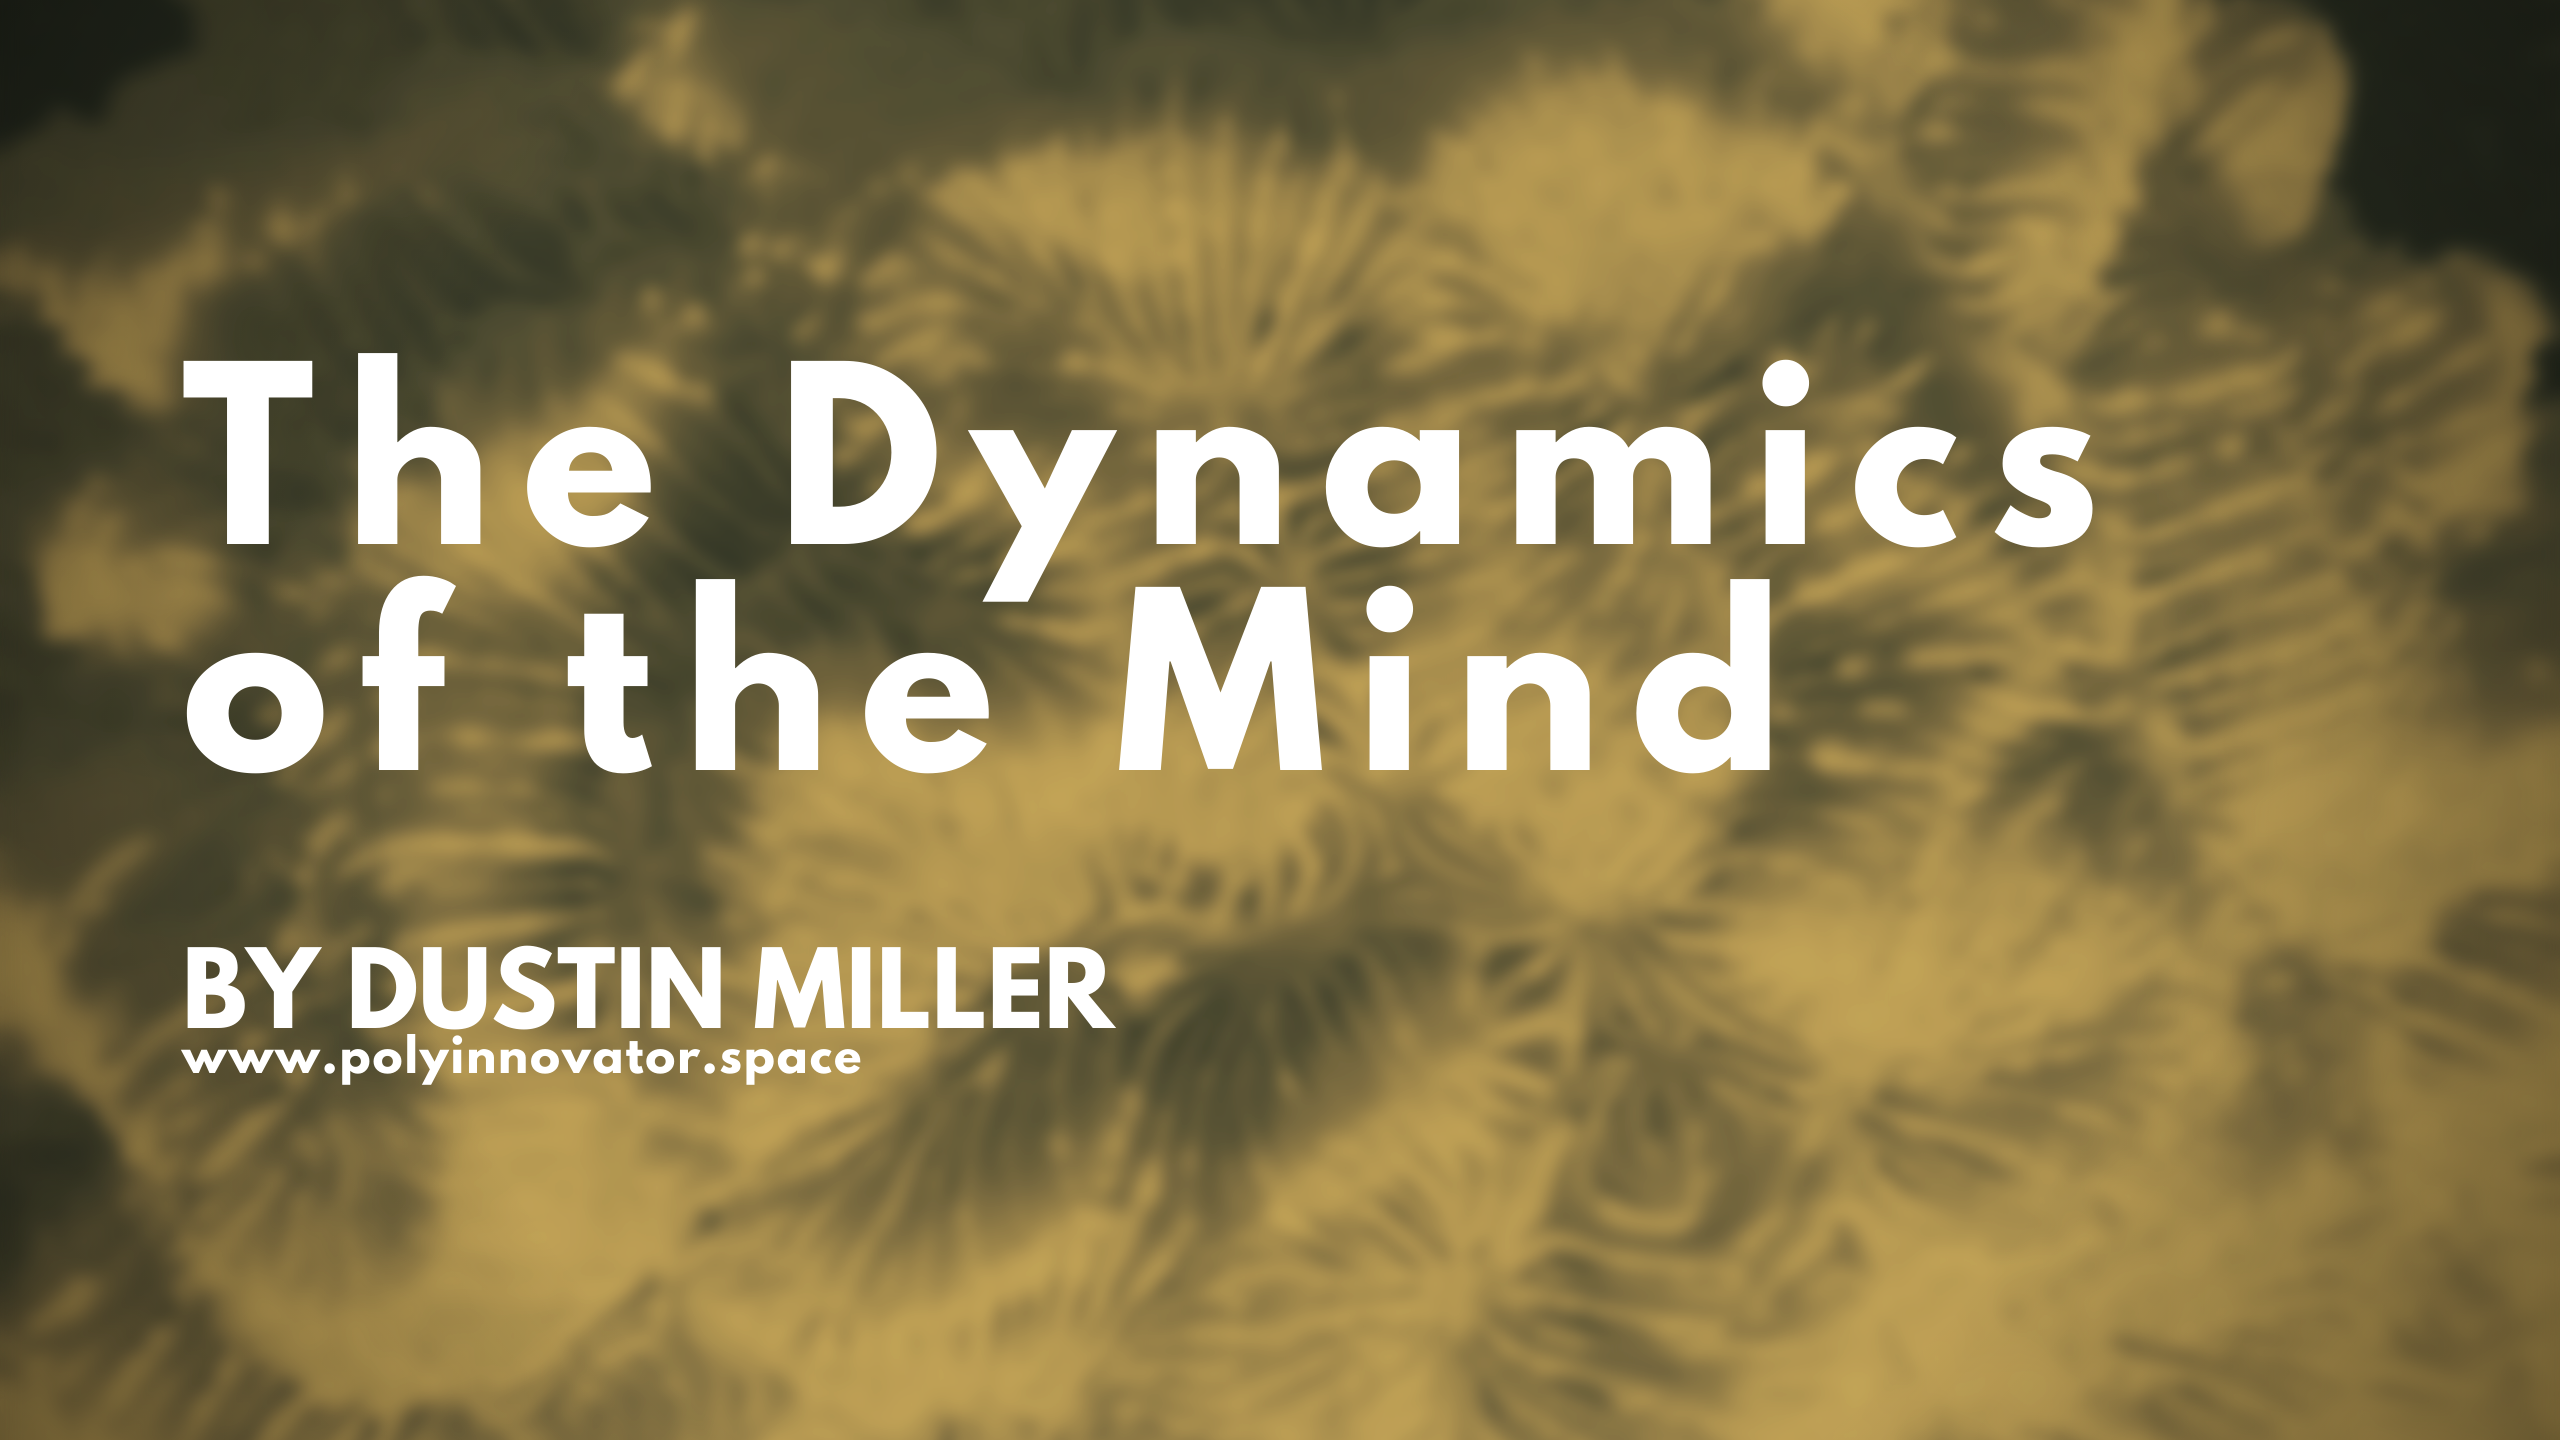 The Dynamics of the Mind